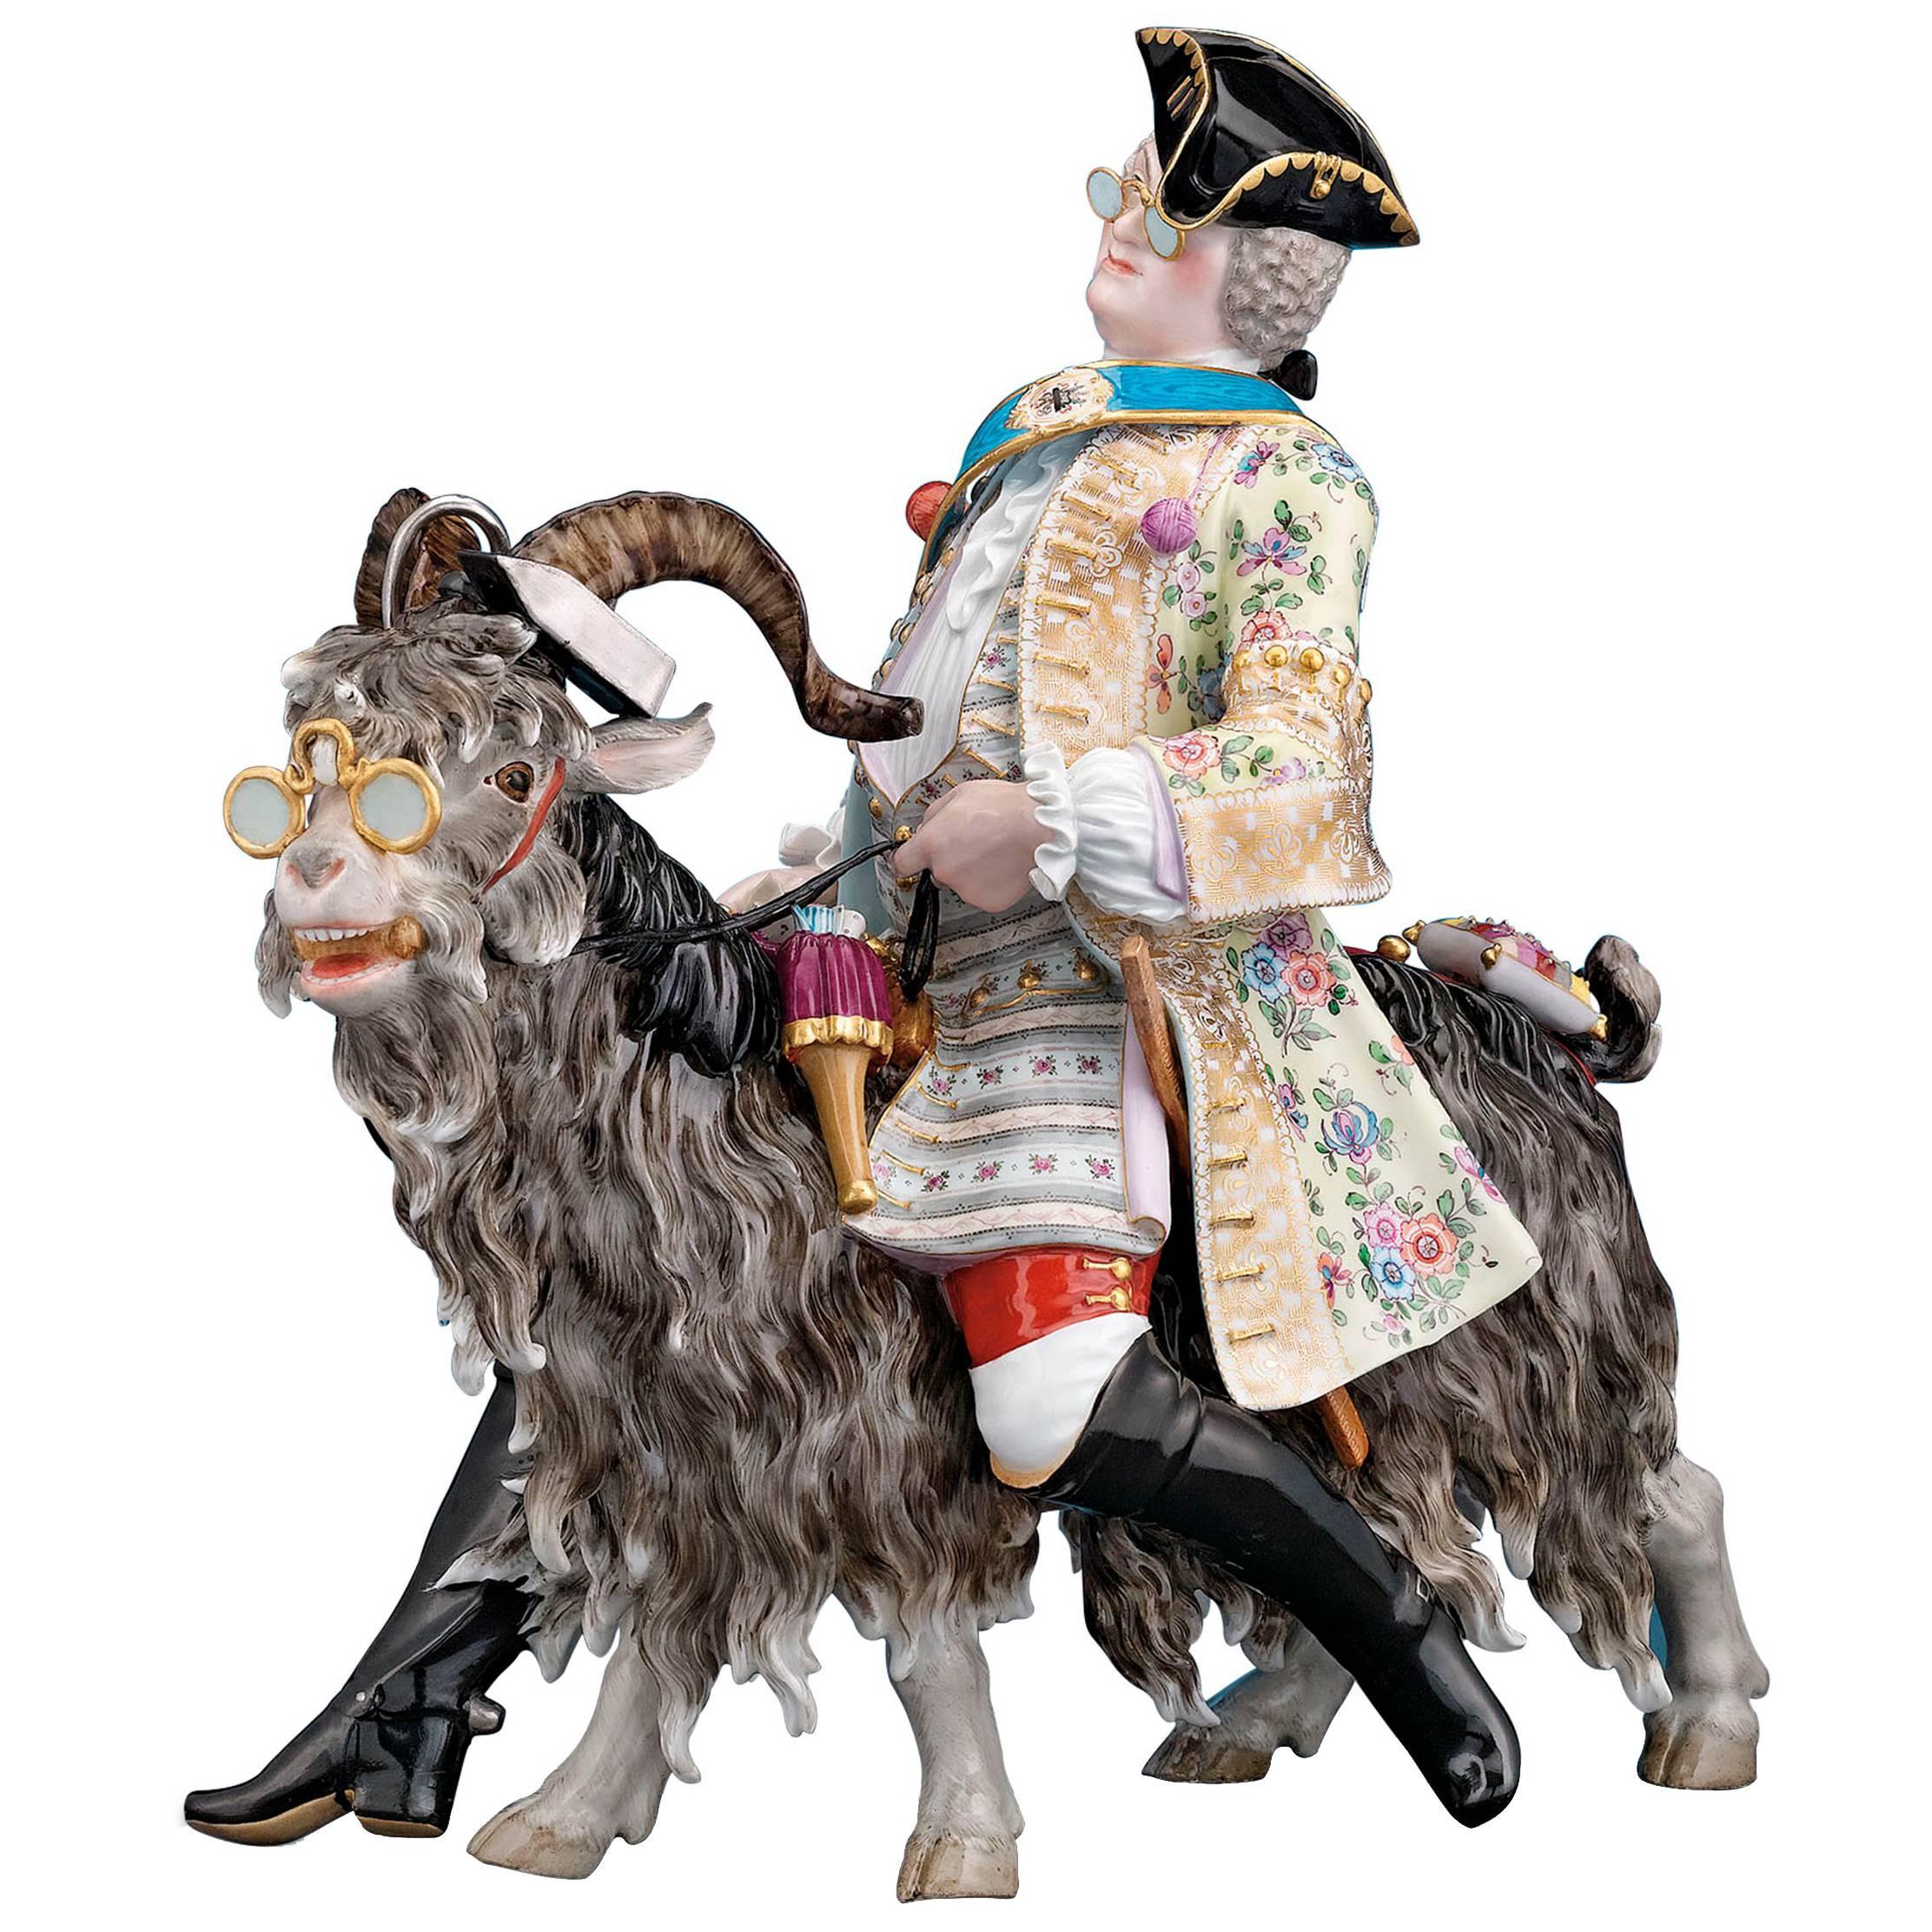 Count Bruhl's Tailor on a Goat Porcelain Figure by Meissen